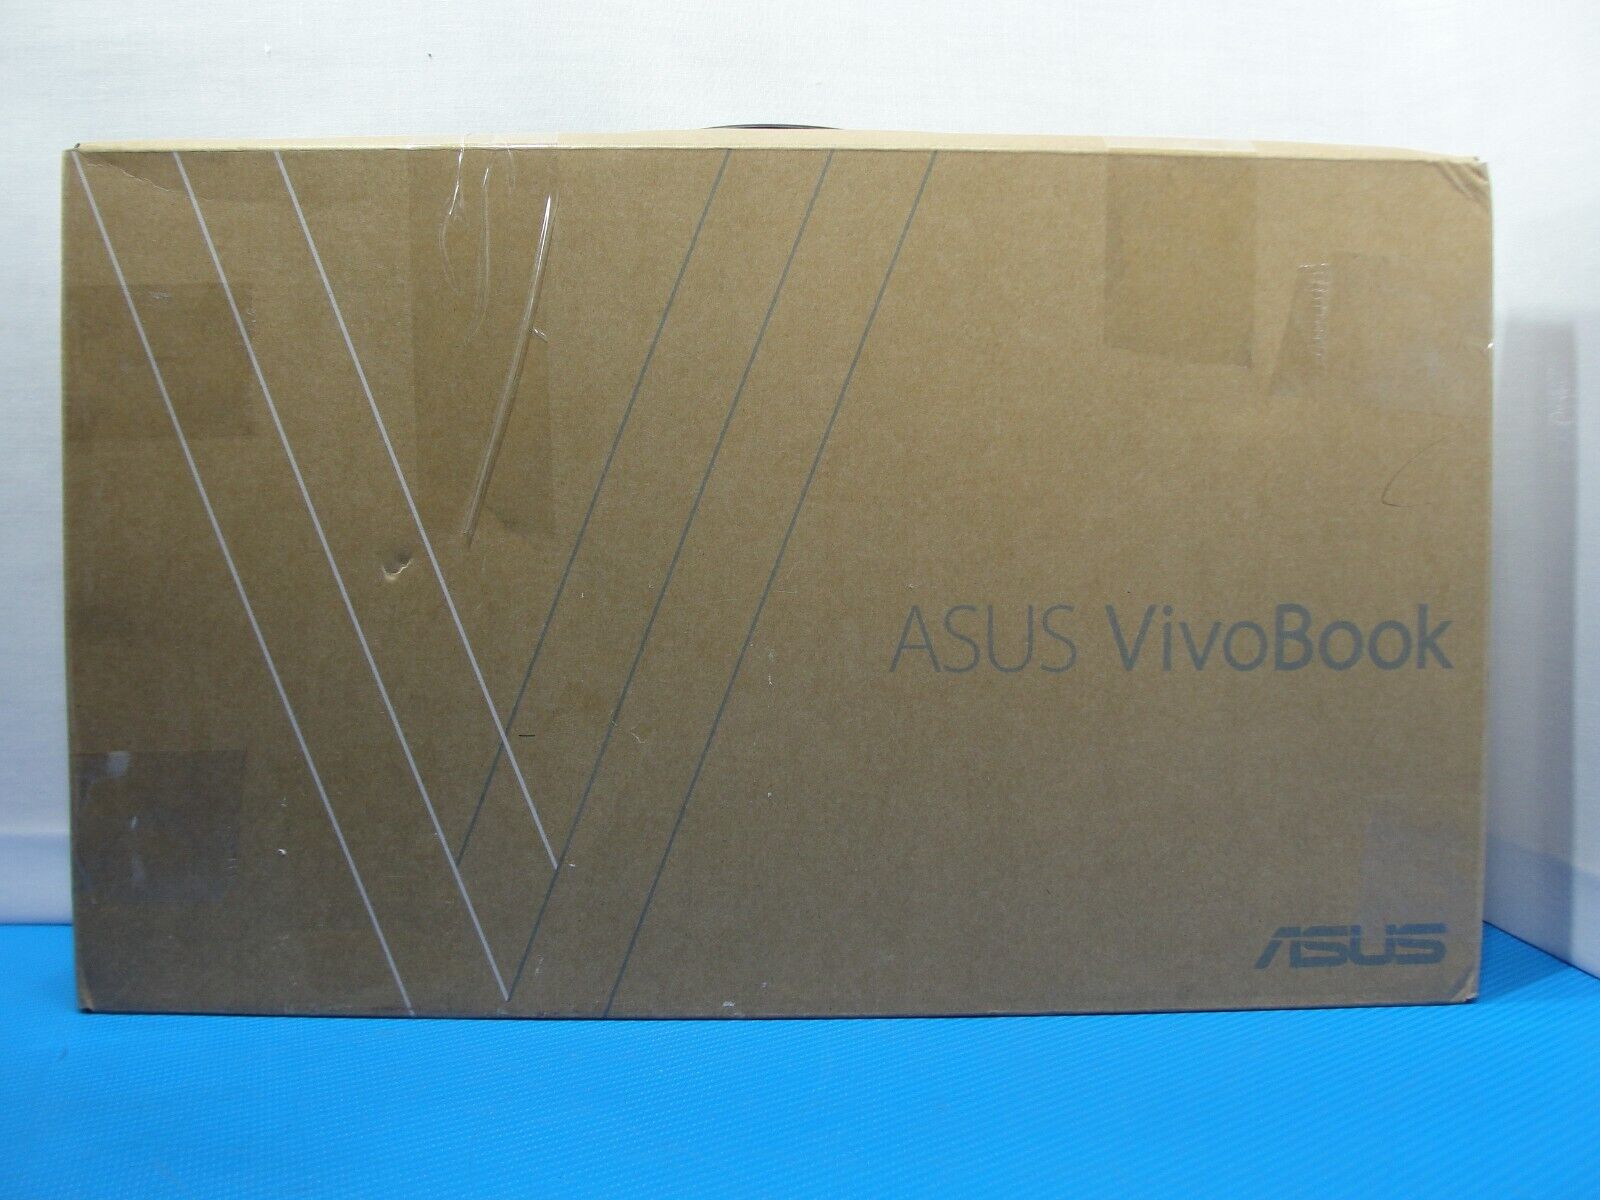 ASUS VivoBook Flip 2in1 Laptop 14 TOUCH i3-1115G4 3.0GHz 4GB 128GB Win 10H